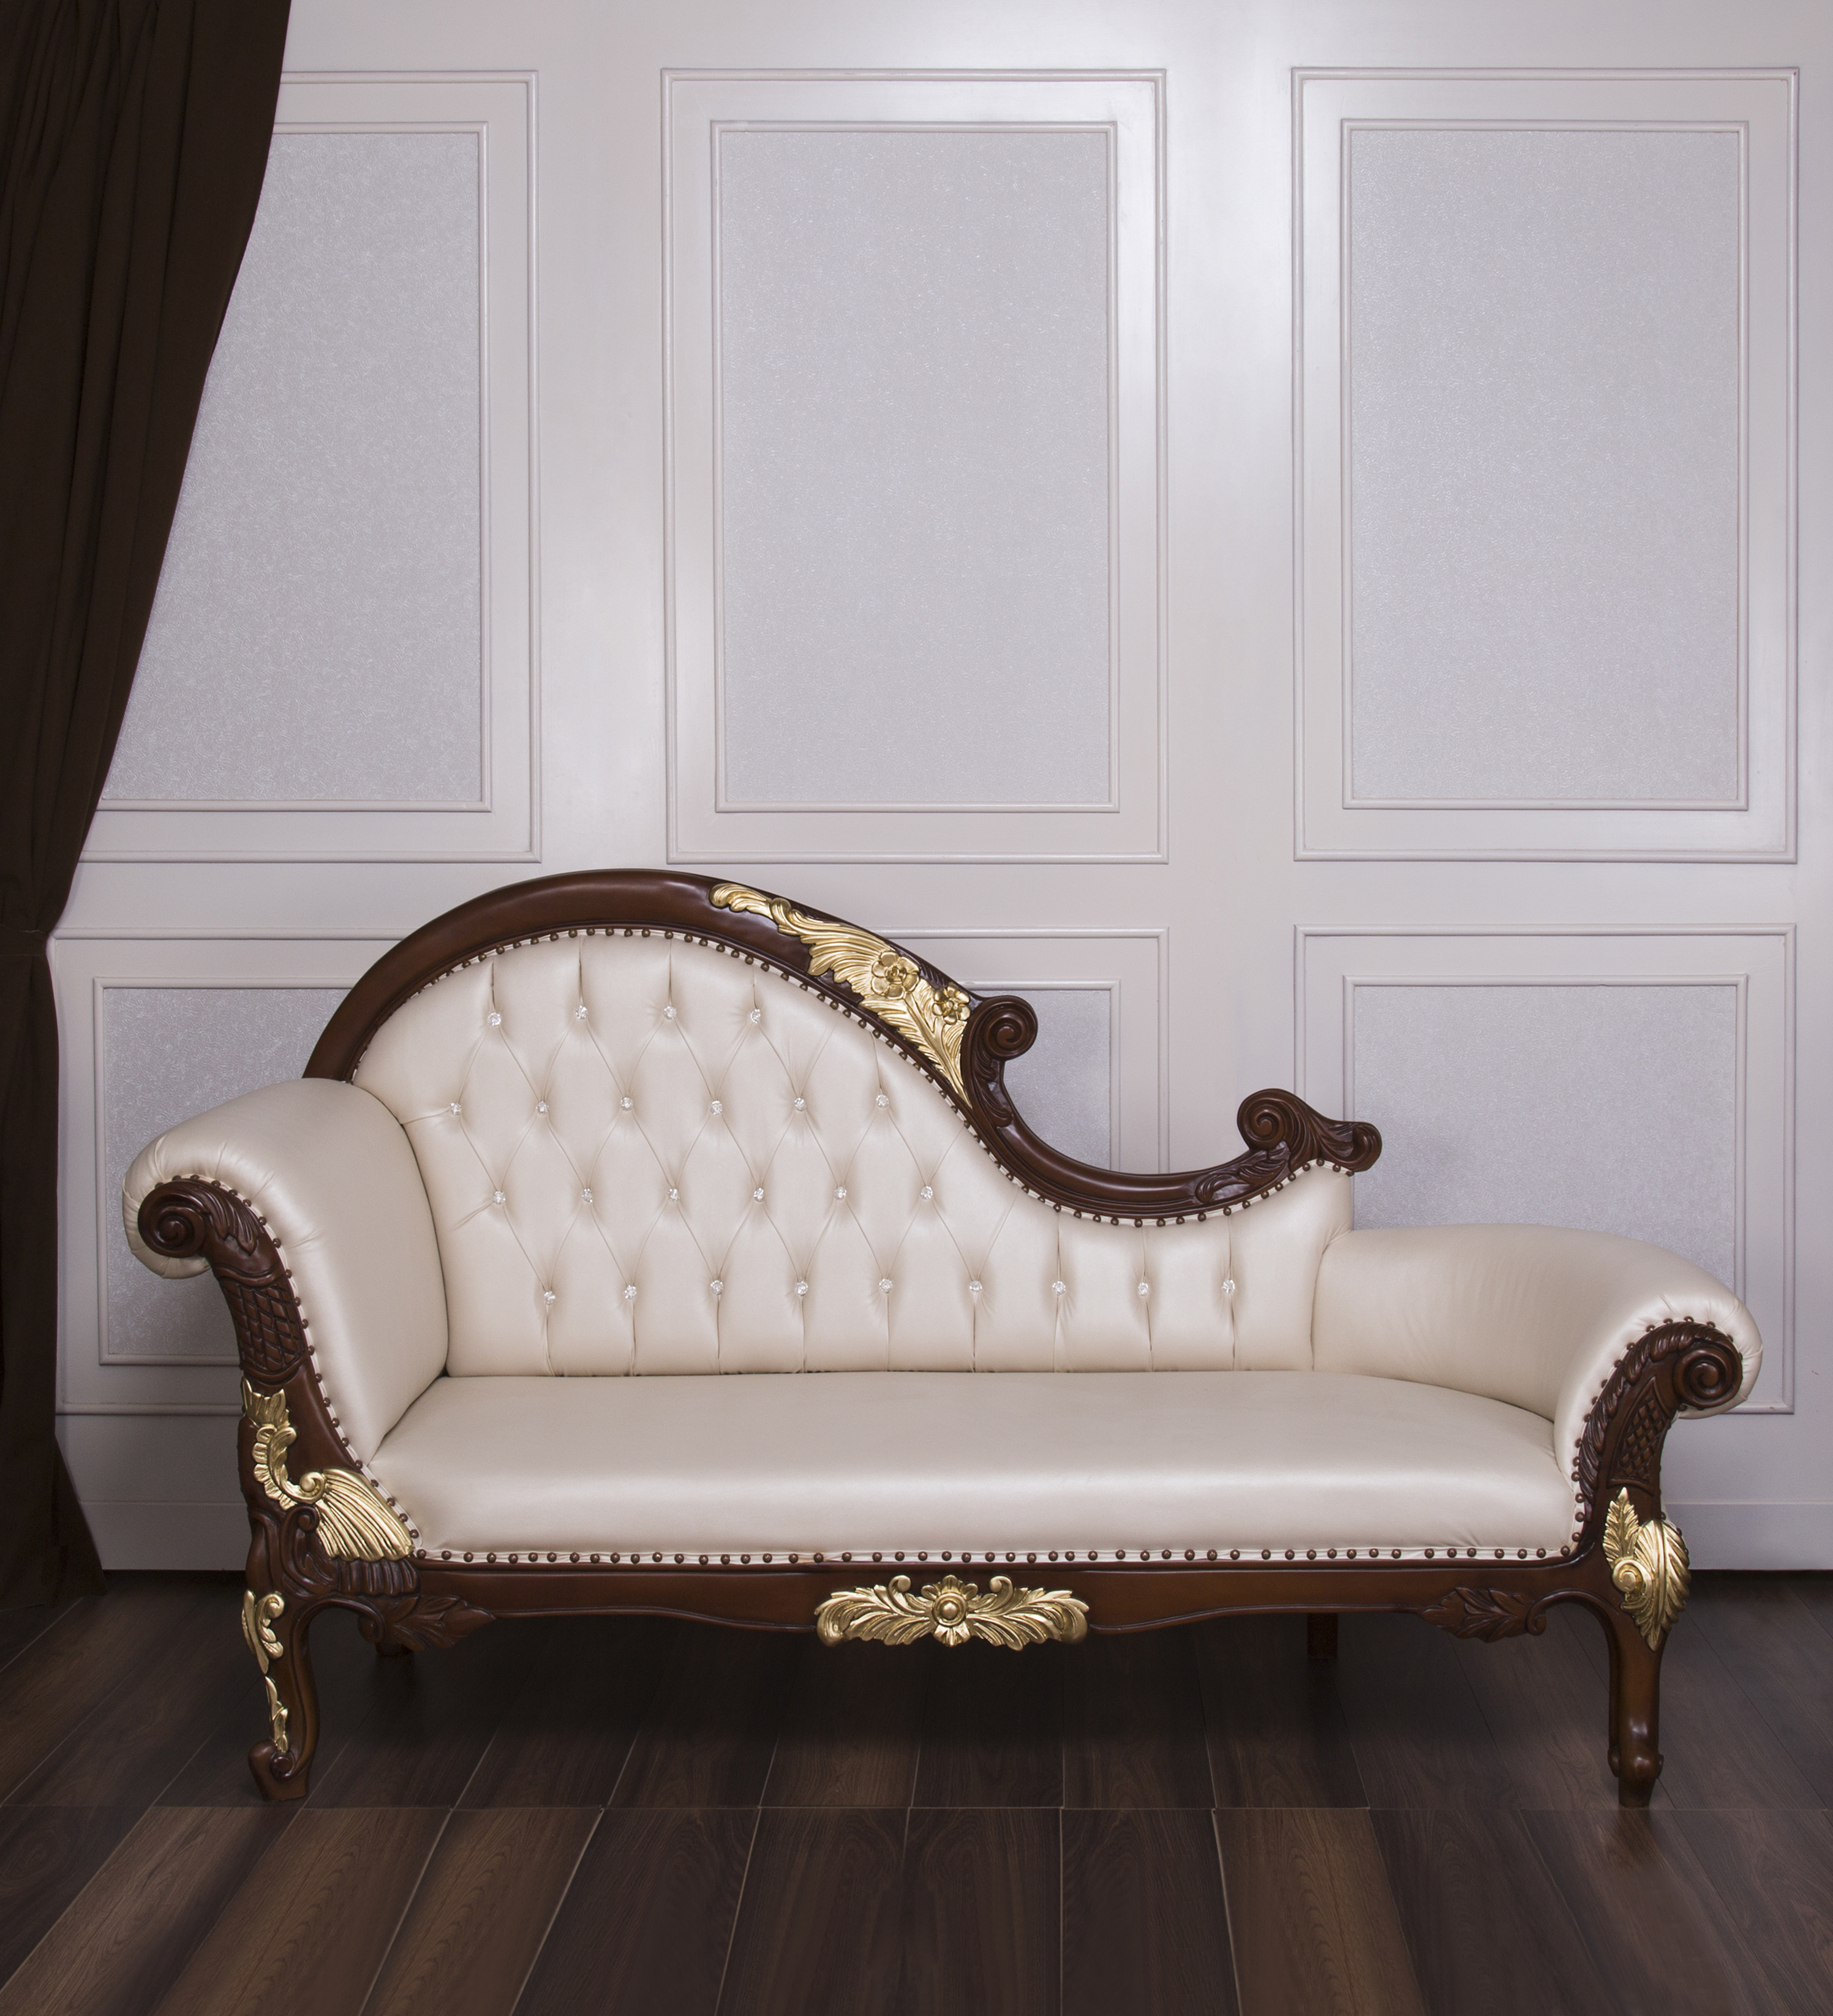 Dark Wood with Gold Details & Champagne Leather Nefertiti Chaise Lounge